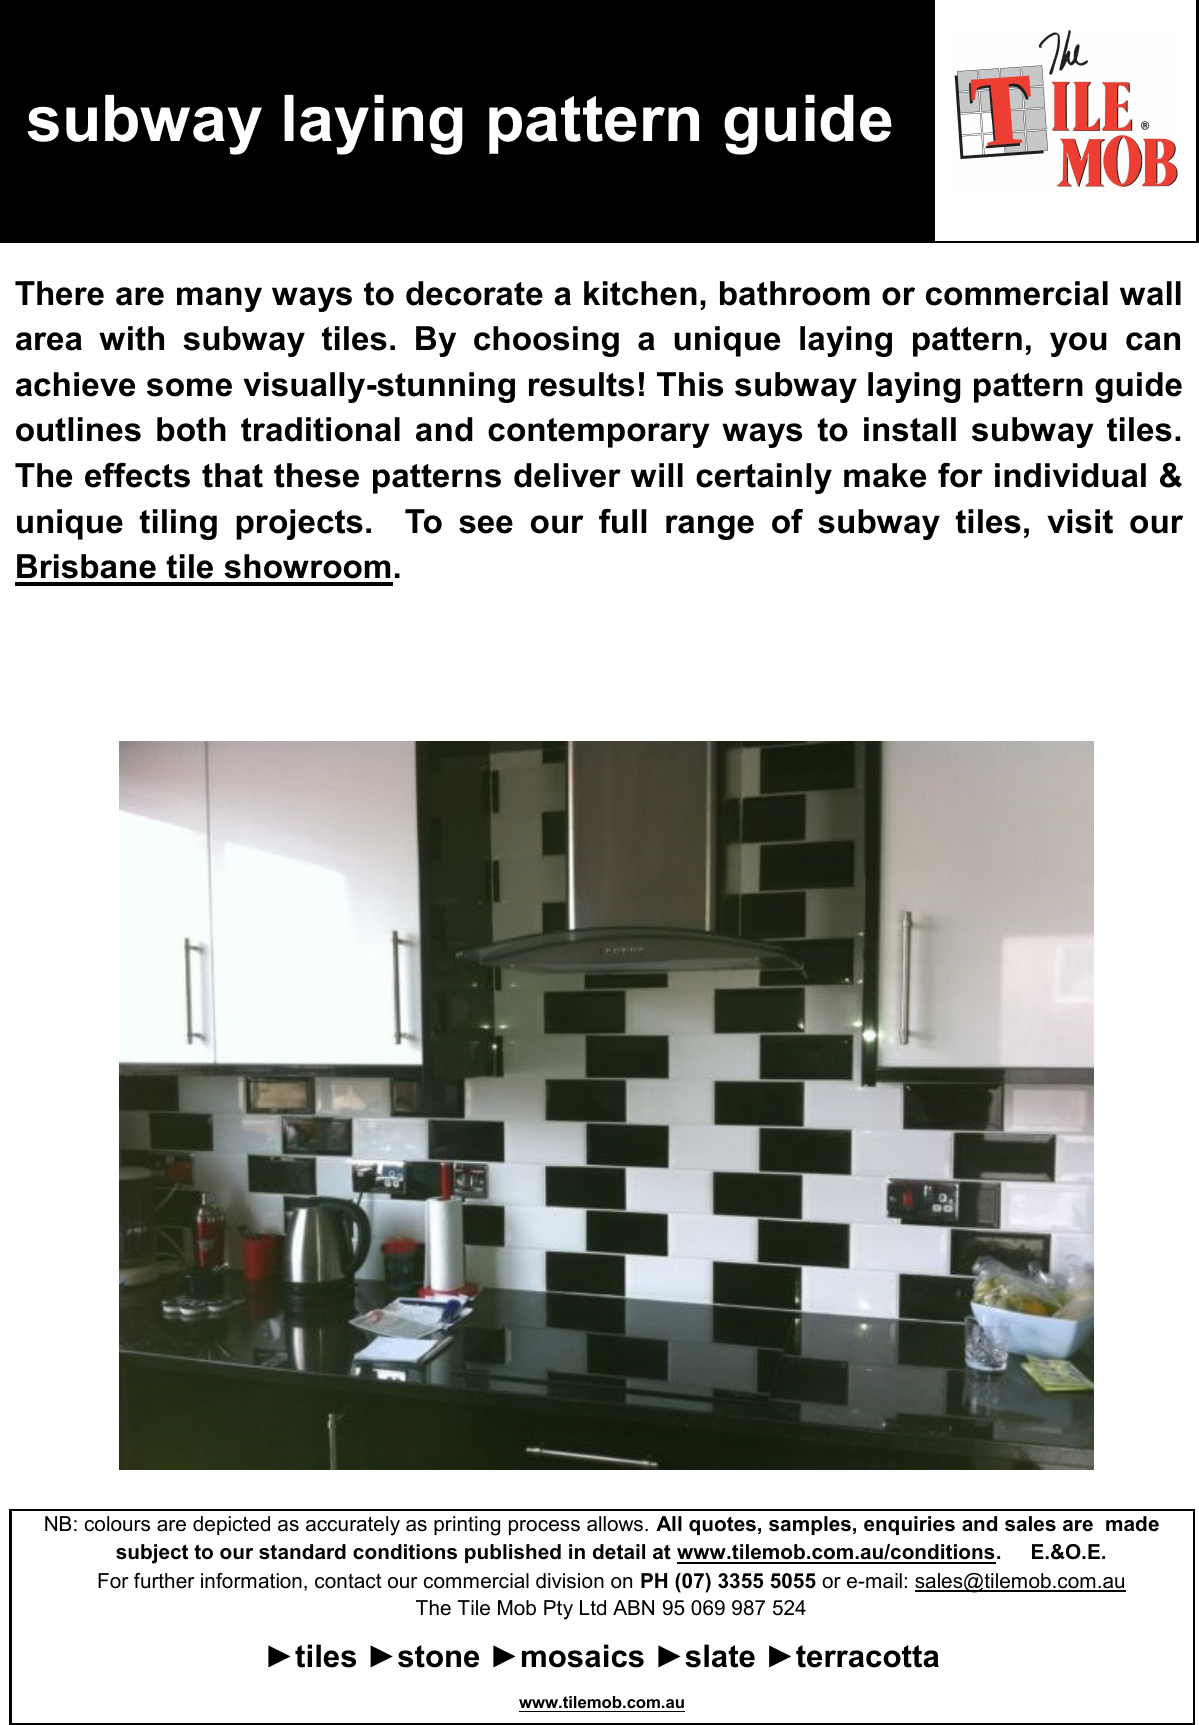 Page 1 of 6 - 1408681668one Subway Tile Pattern Laying Guide The Mob Brisbane